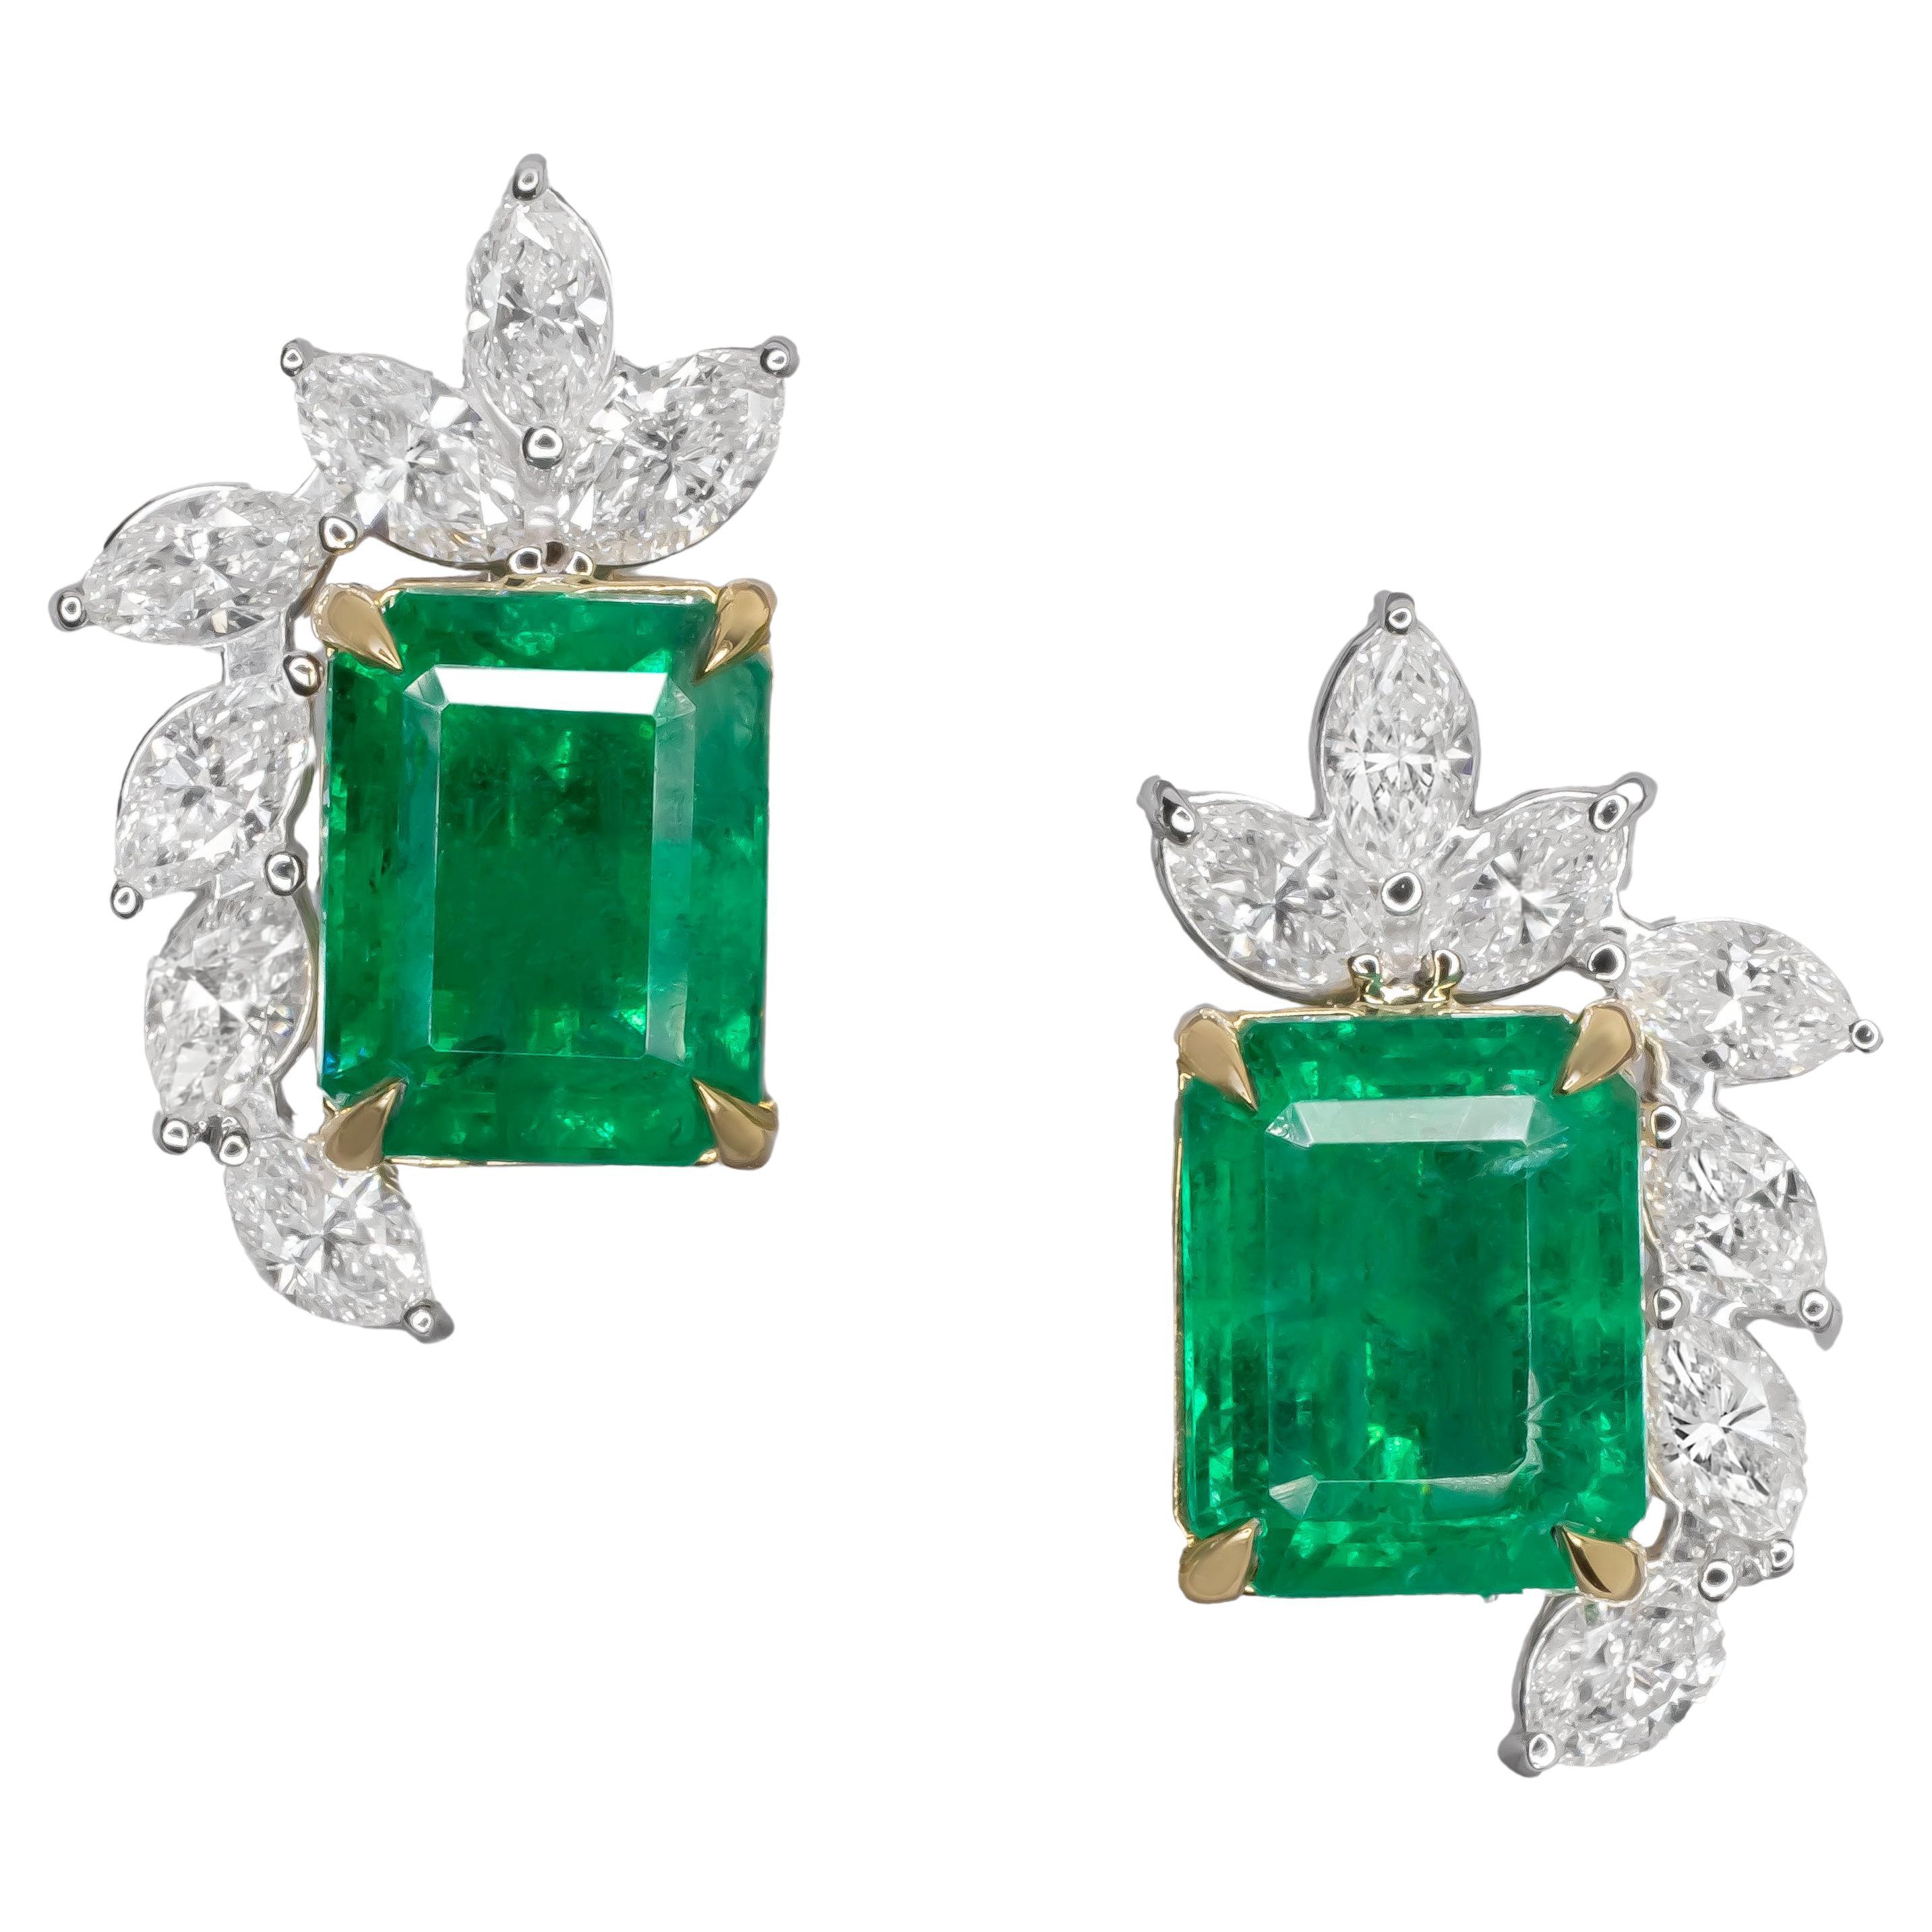 GIA and IGI Certified 7 Carat Vivid Green Emerald and Marquise Diamonds Earrings For Sale